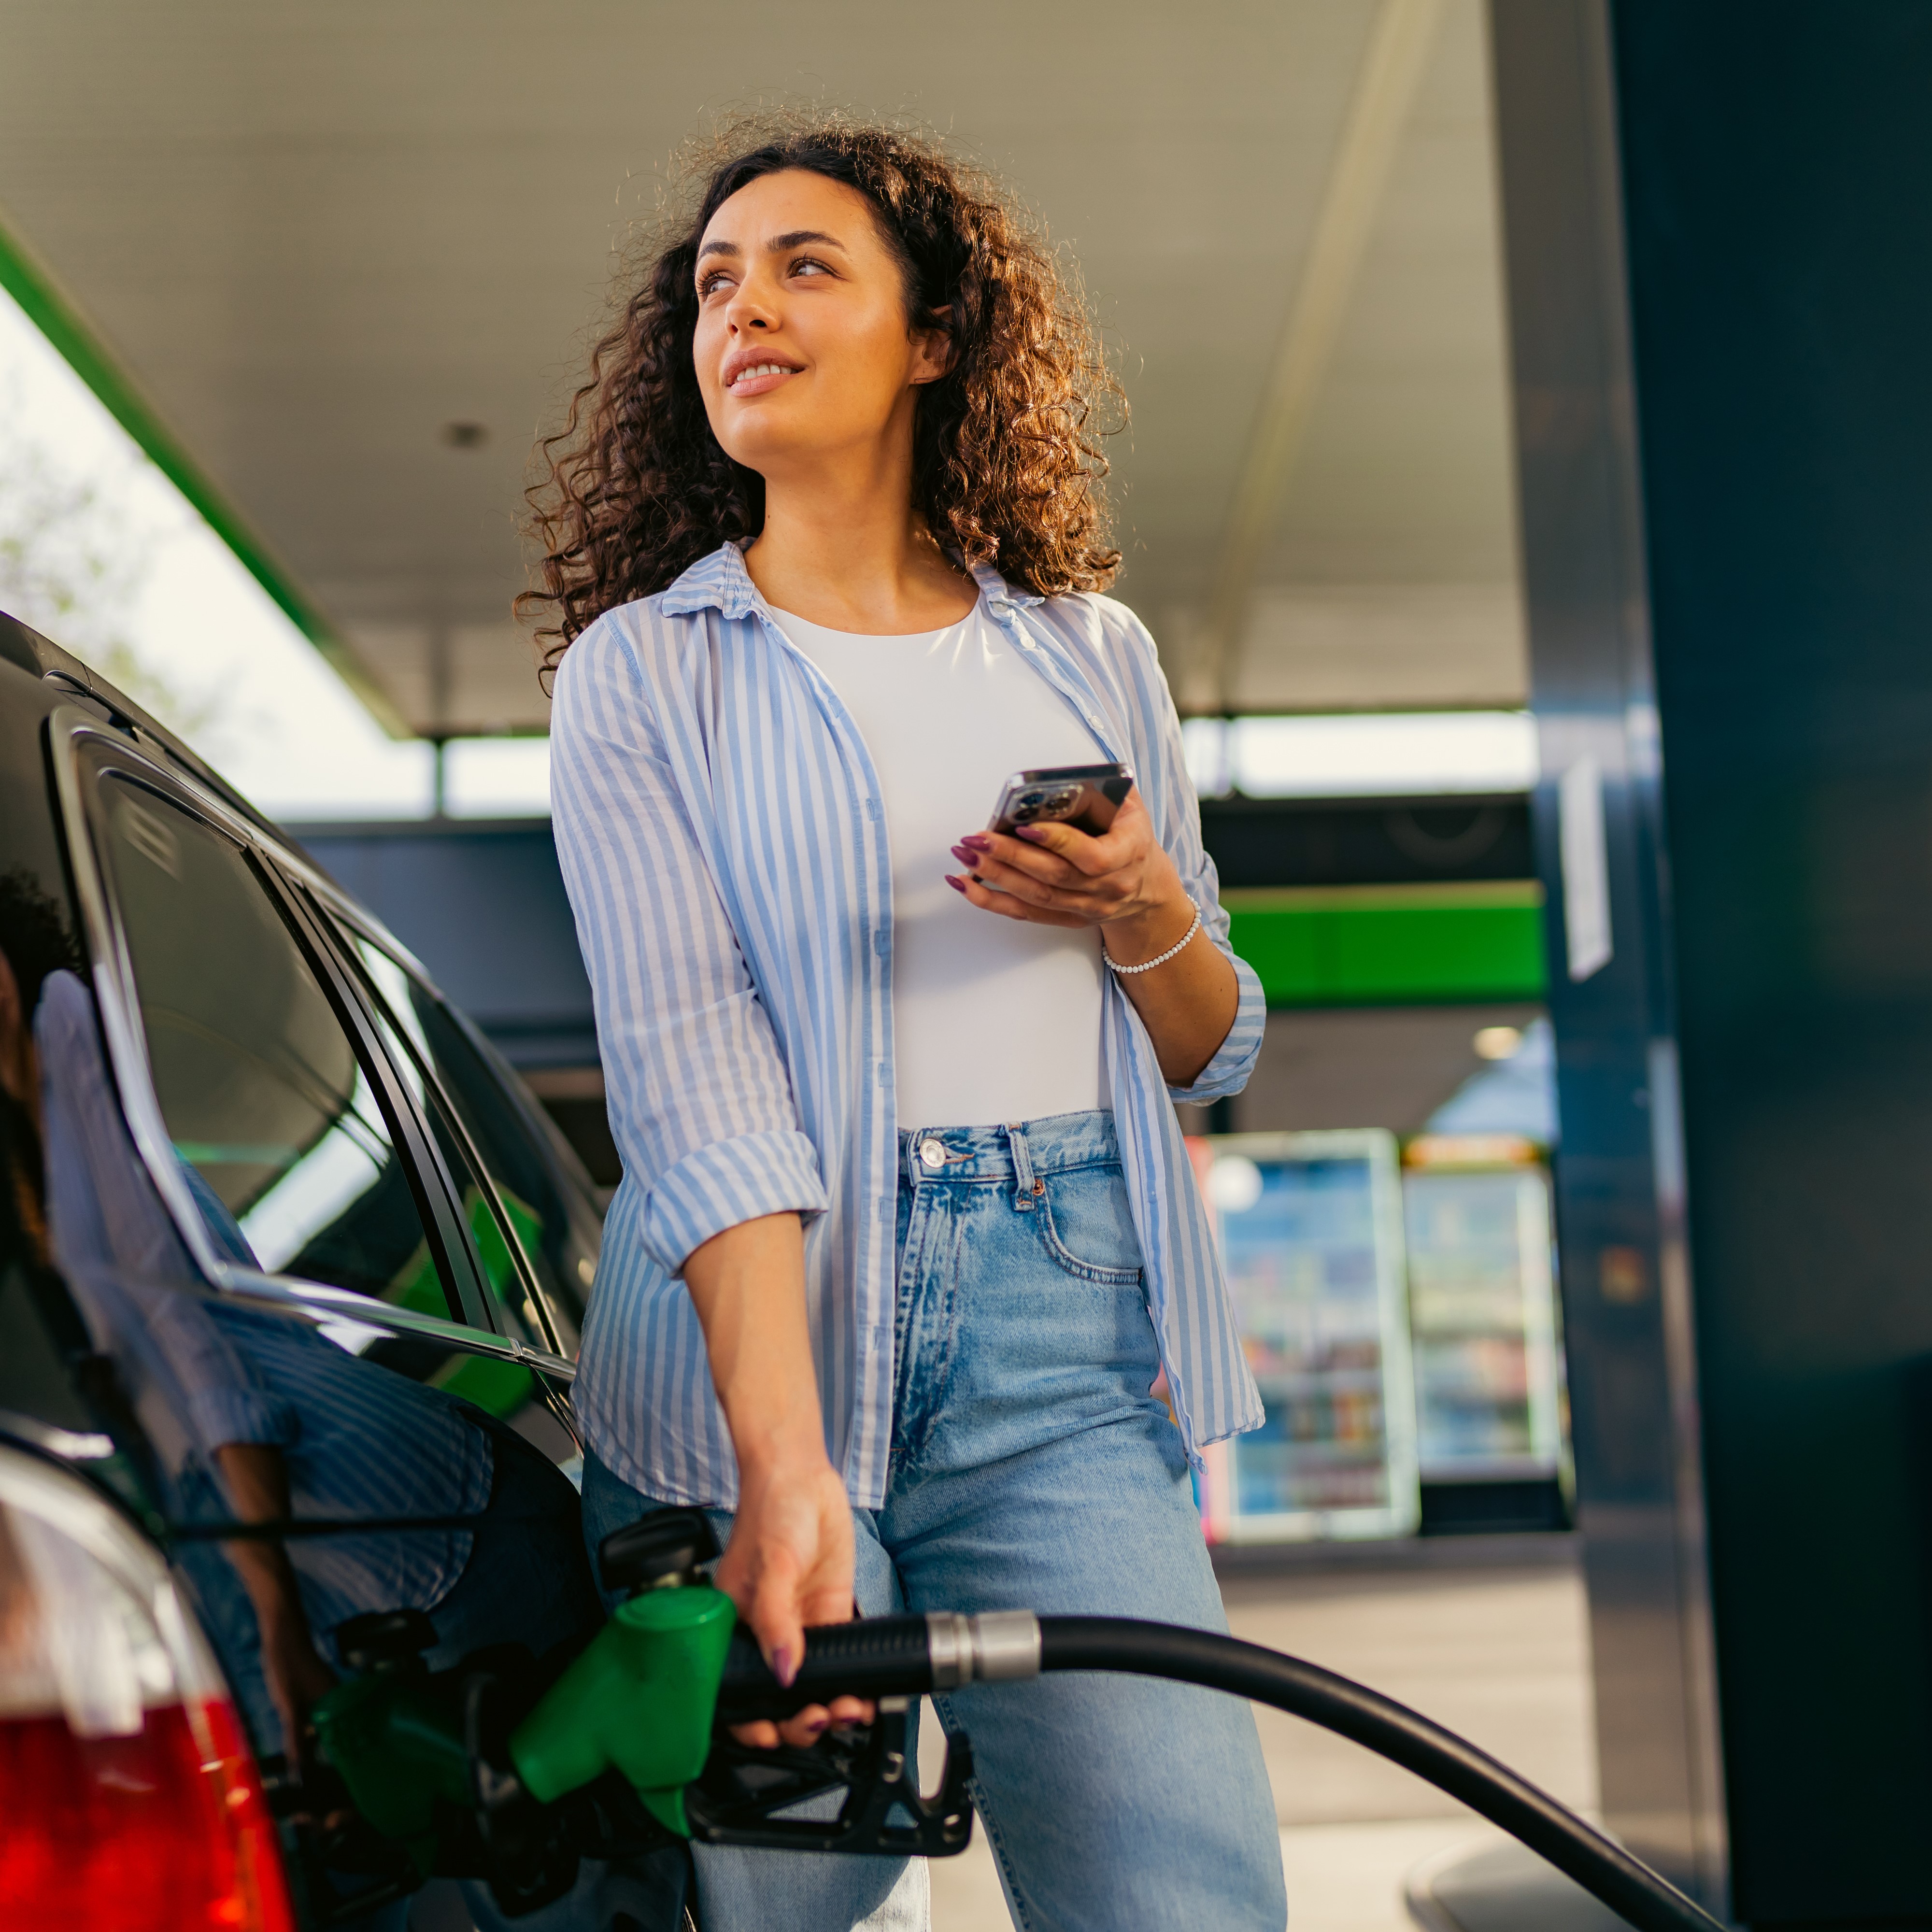 Elevated oil prices could keep drivers paying more at the pump